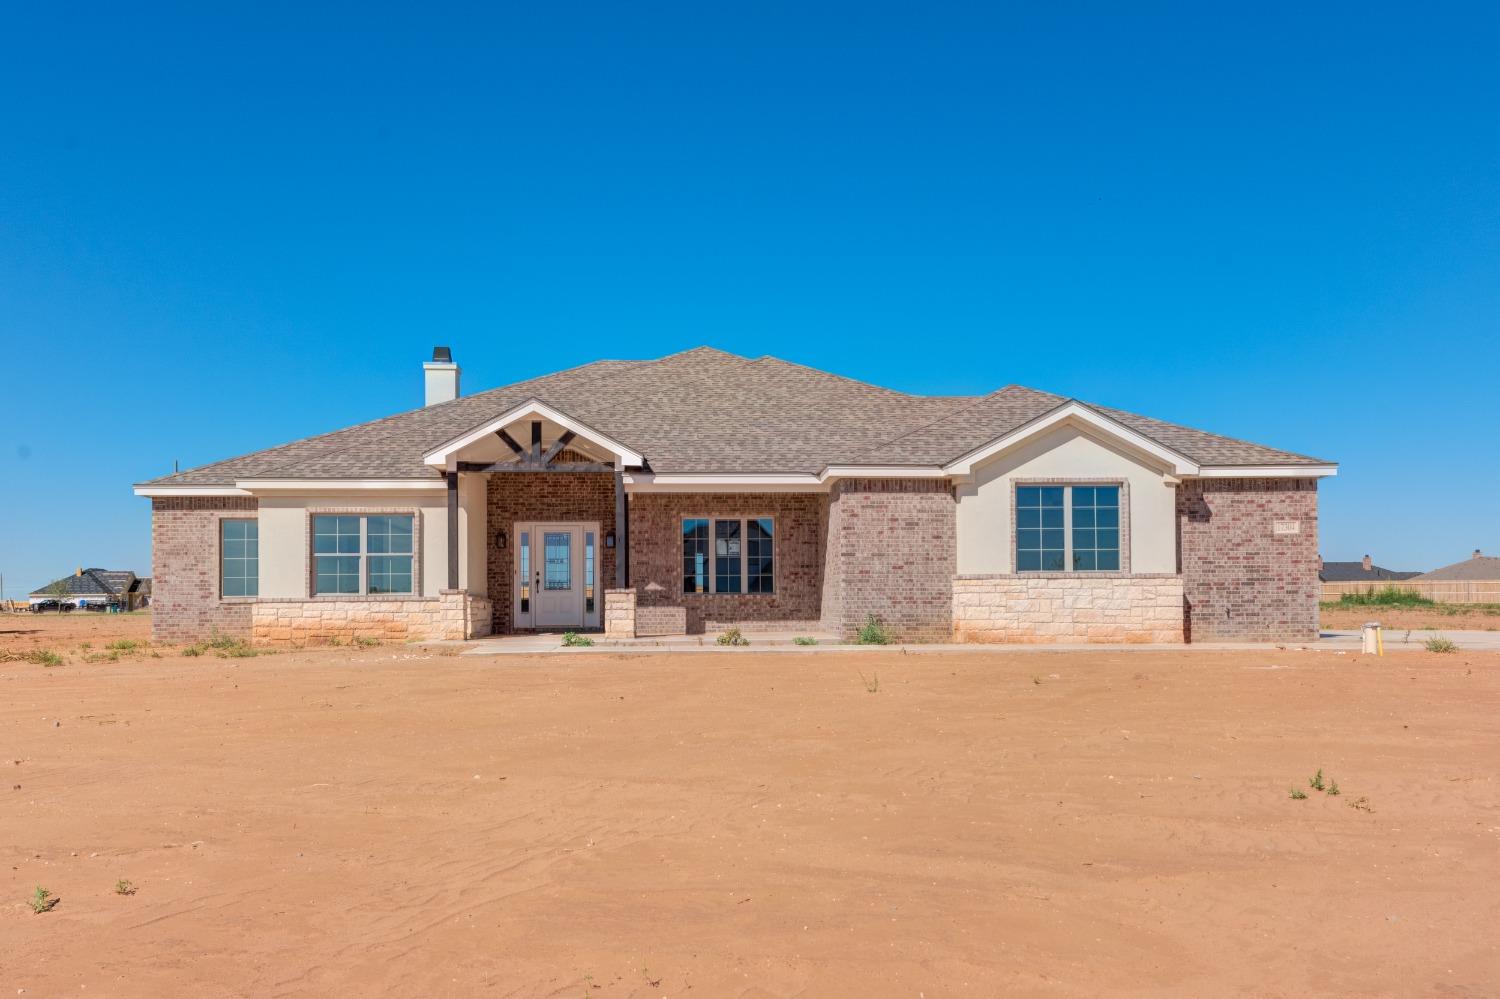 Ask us how to get UP TO $15,000!!  Looking for 1-Acre Lot? NO City Taxes? Well and Septic? Cooper ISD? Great Neighborhood? Magnolia Estates and Edge Homes has teamed up to bring you the Best of Lubbock. Magnolia Estates is peaceful and Beautiful. Close to Grocery Stores, tons of Eateries in one of Lubbock's Best School District, you will fall in love with not only the Home of your Dreams but the Location as well! This home has 4 Bedrooms, 3 full Bathrooms. Come see us today and let Edge Homes make your dreams a reality. **Selections subject to change based on Availability***